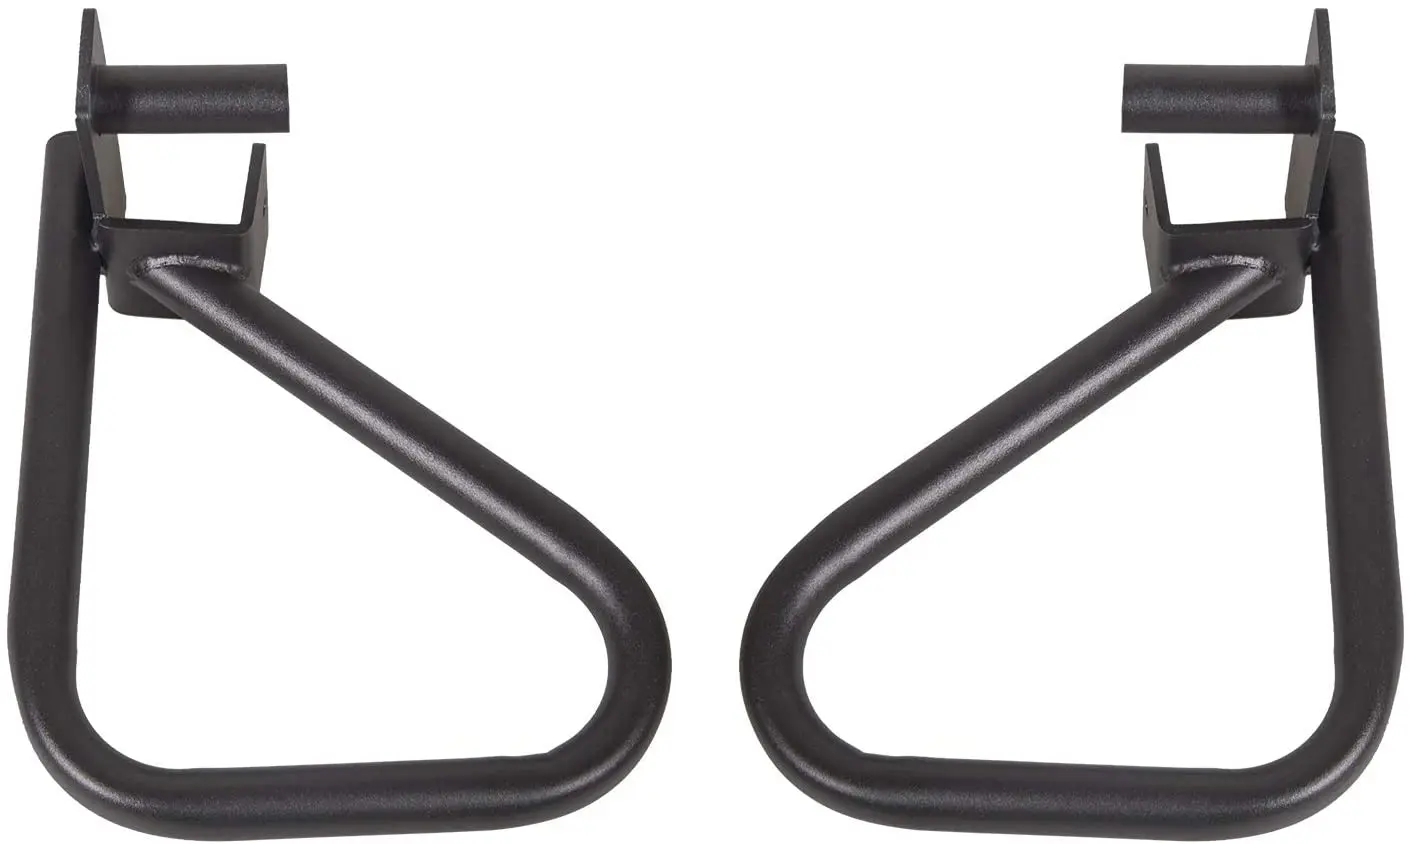 Set of 2 Dip Bar Attachments – Designed to fit 2